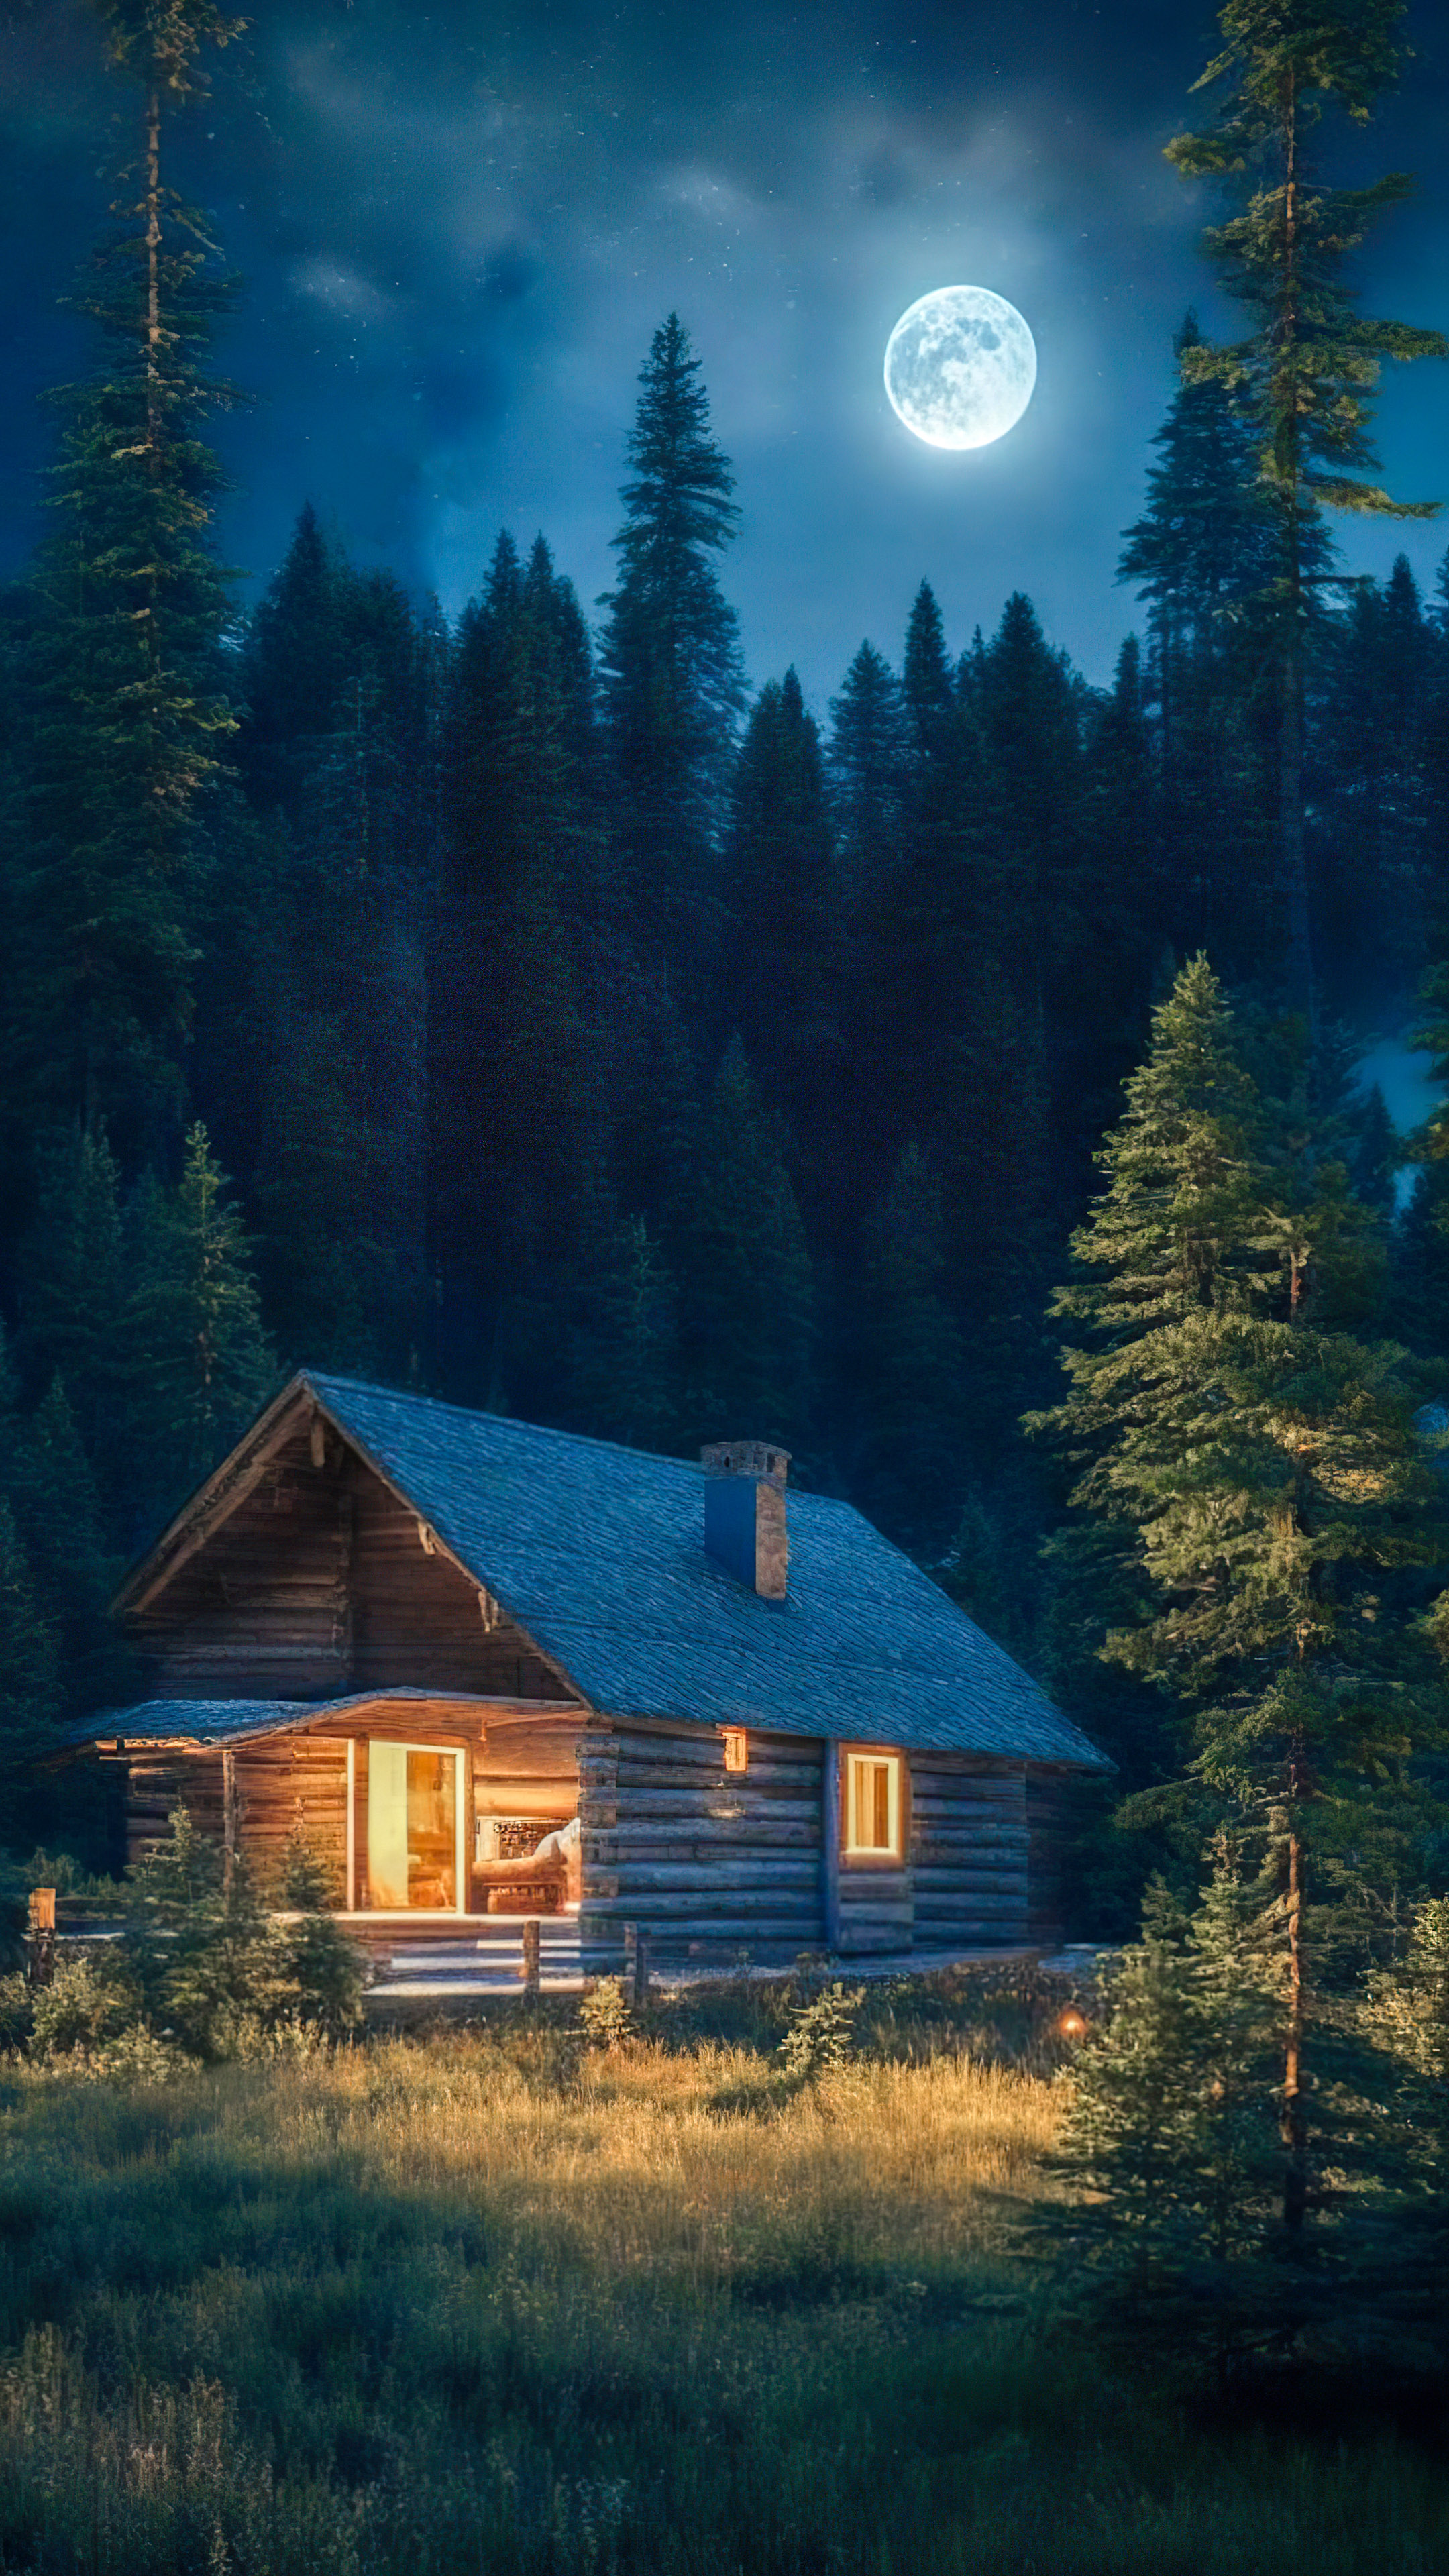 Embrace the serenity of our night nature wallpaper, depicting a cozy cabin nestled among pine trees, bathed in the gentle light of a full moon.